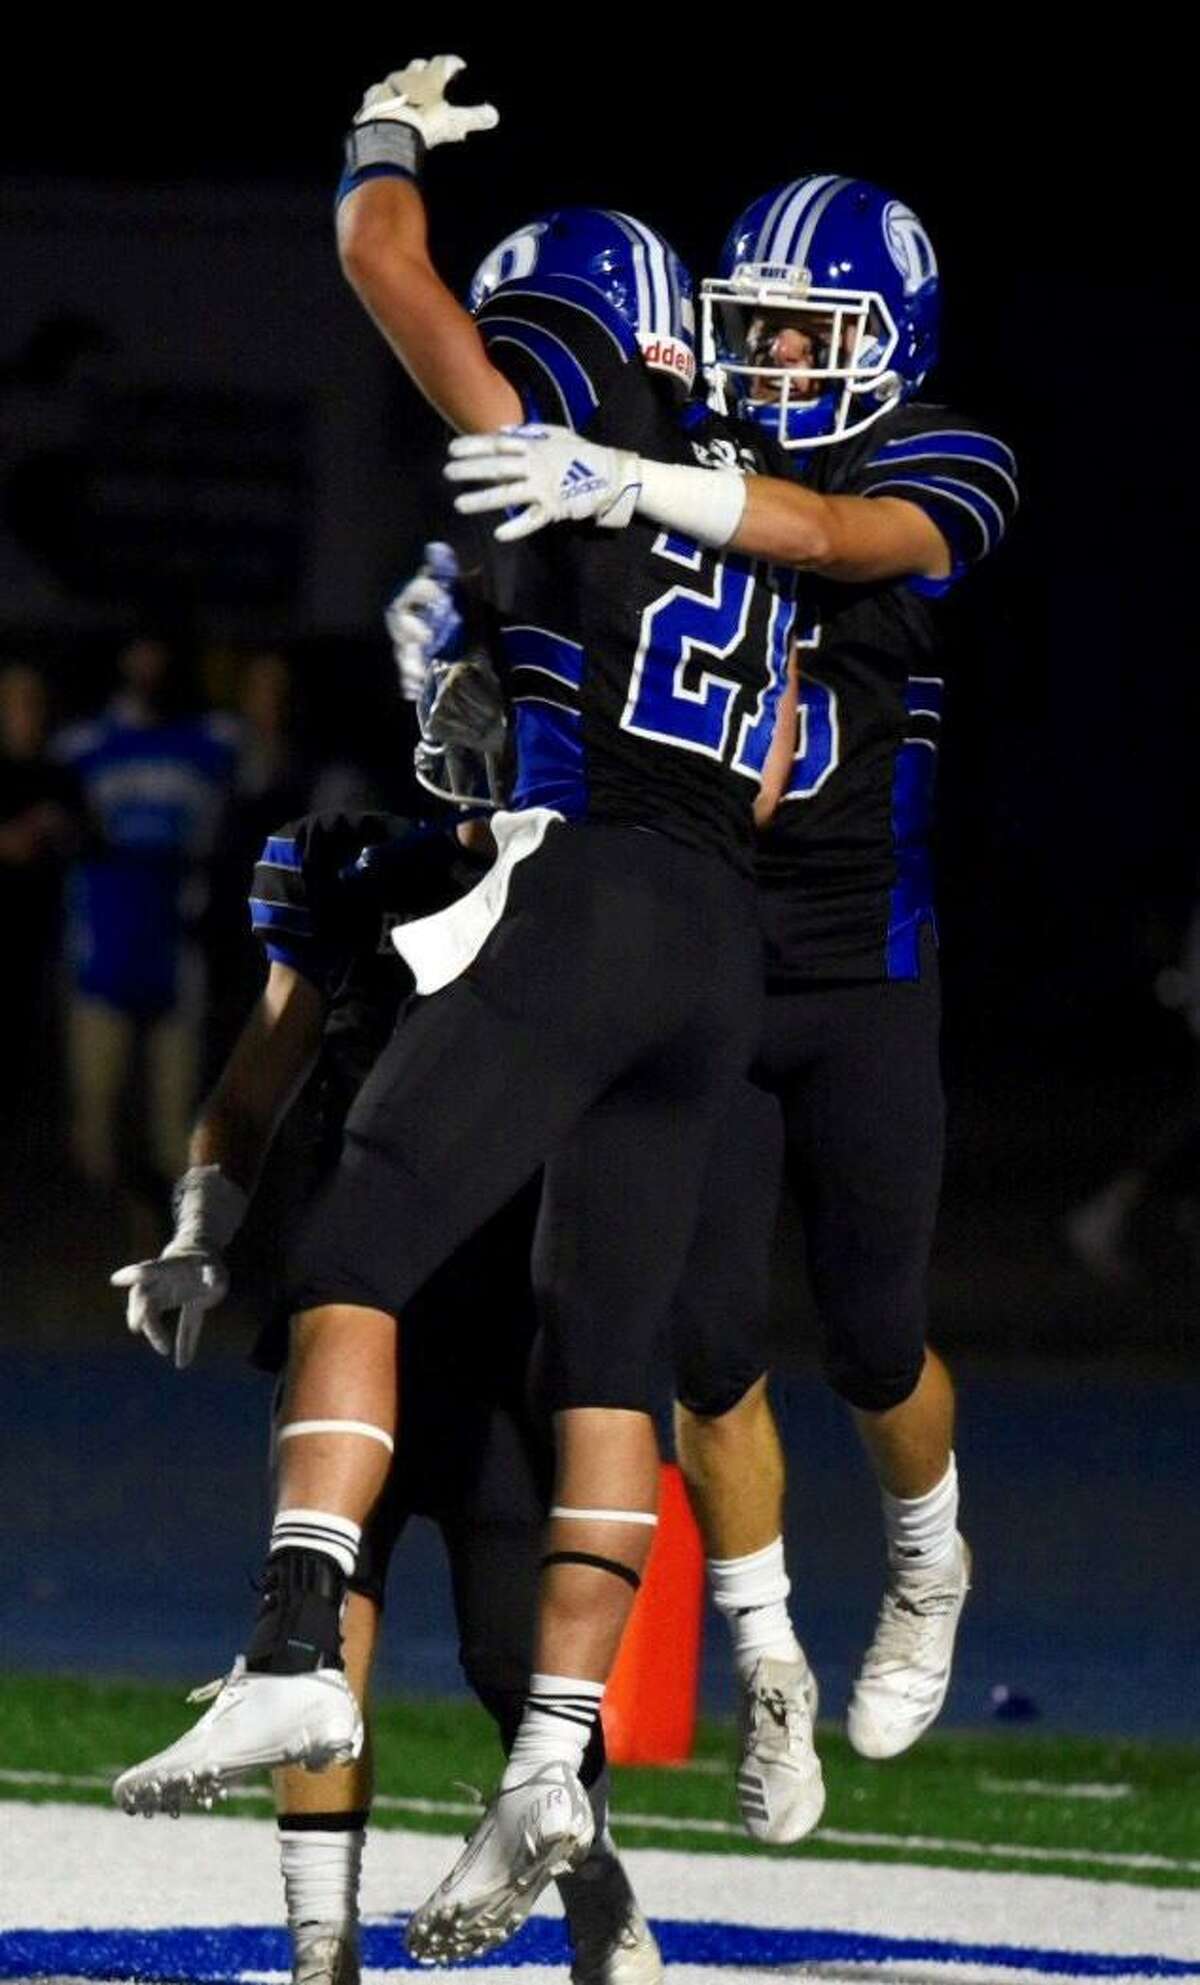 Darien’s Will Kirby (21) and Michael Minicus celebrate a touchdown during a football game against Southington at Darien on Friday.